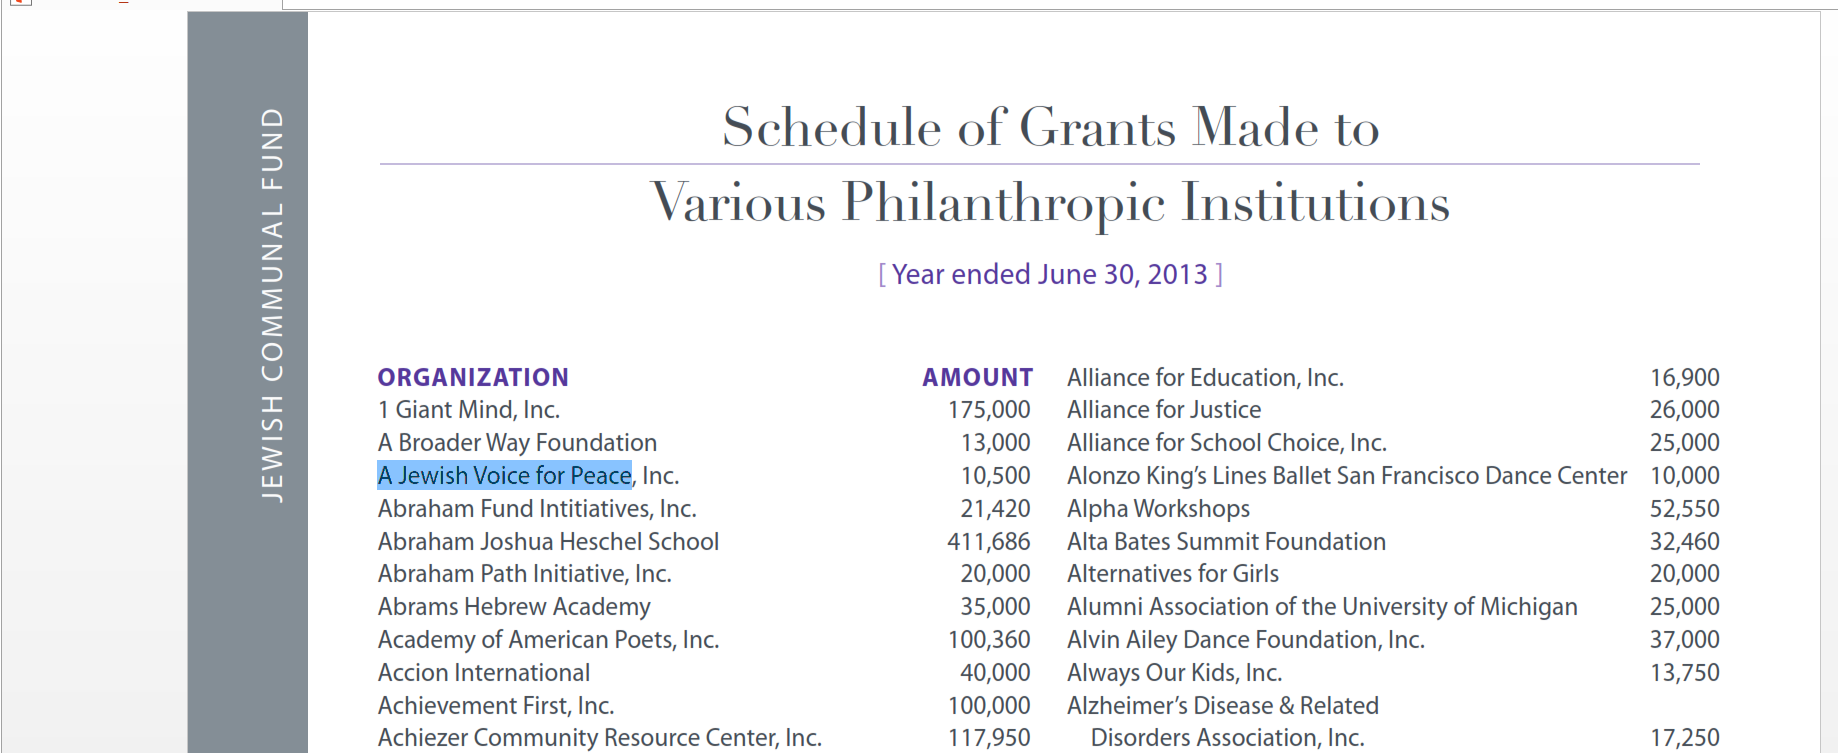 Jewish Communal Fund 2013 annual report showing donation to A Jewish Voice for Peace, on the Anti-Defamation League's Top 10 Anti-Israel groups.